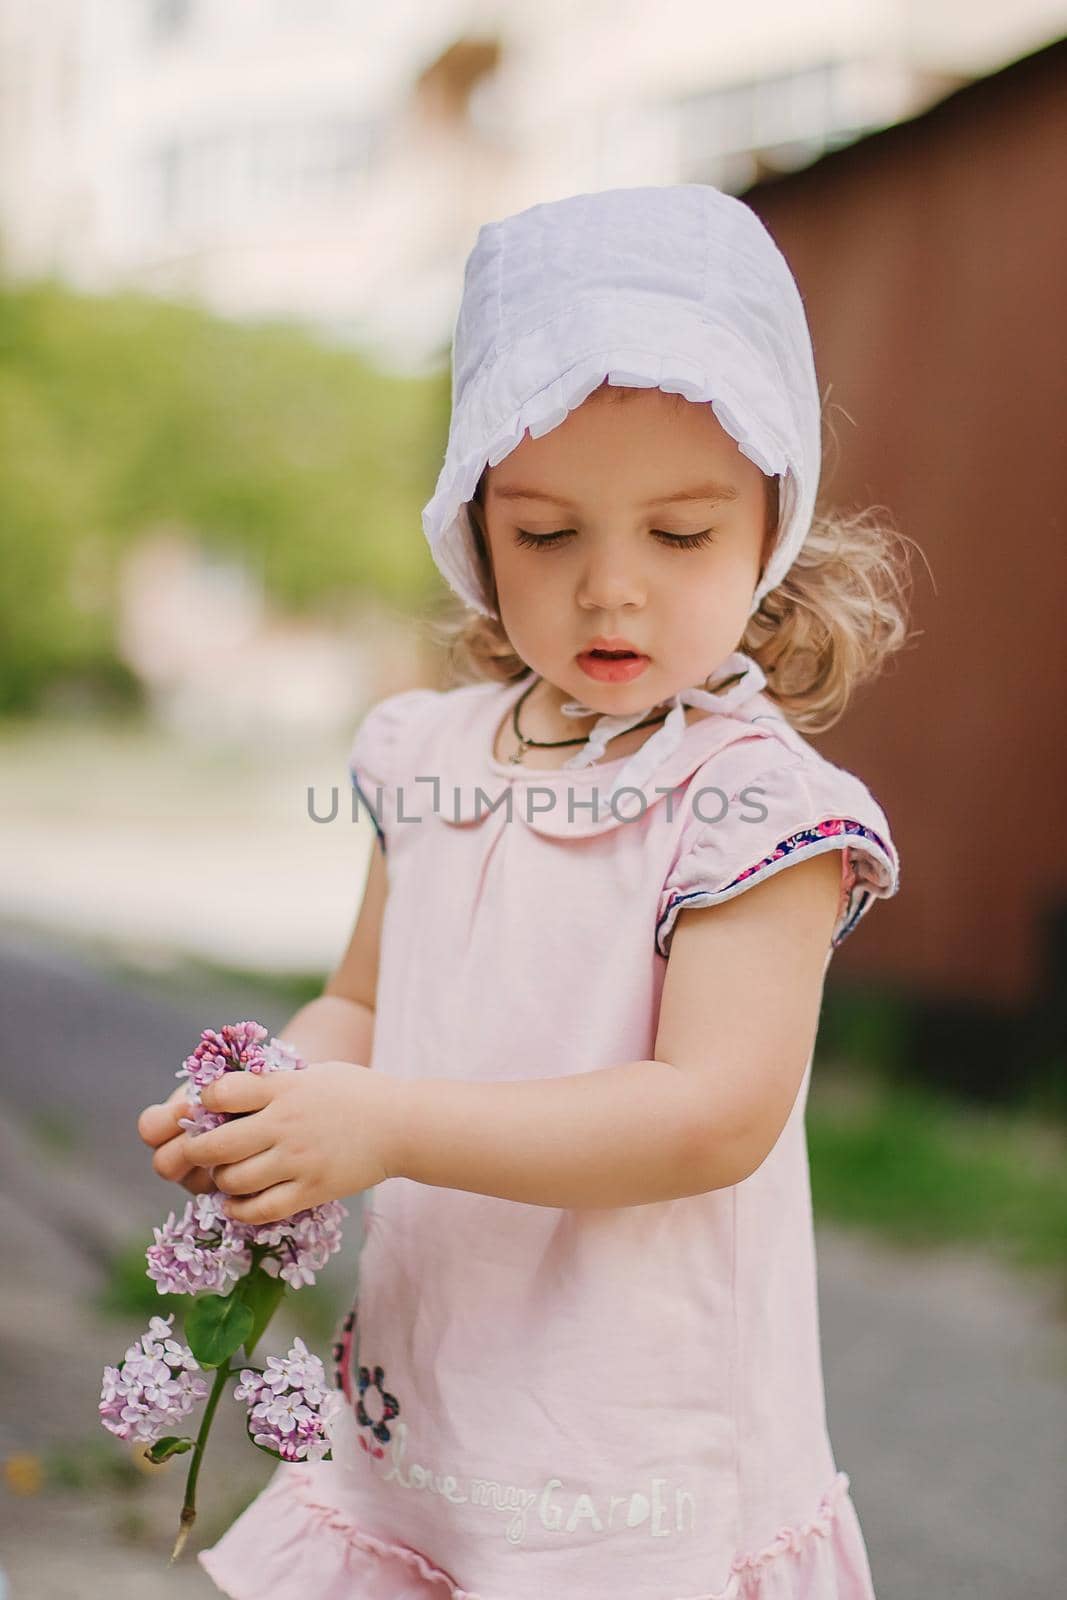 A beautiful little girl in a pink dress holds a branch of lilac flowers. Child in the garden on a background of a wooden fence with flowers in her hands by mmp1206